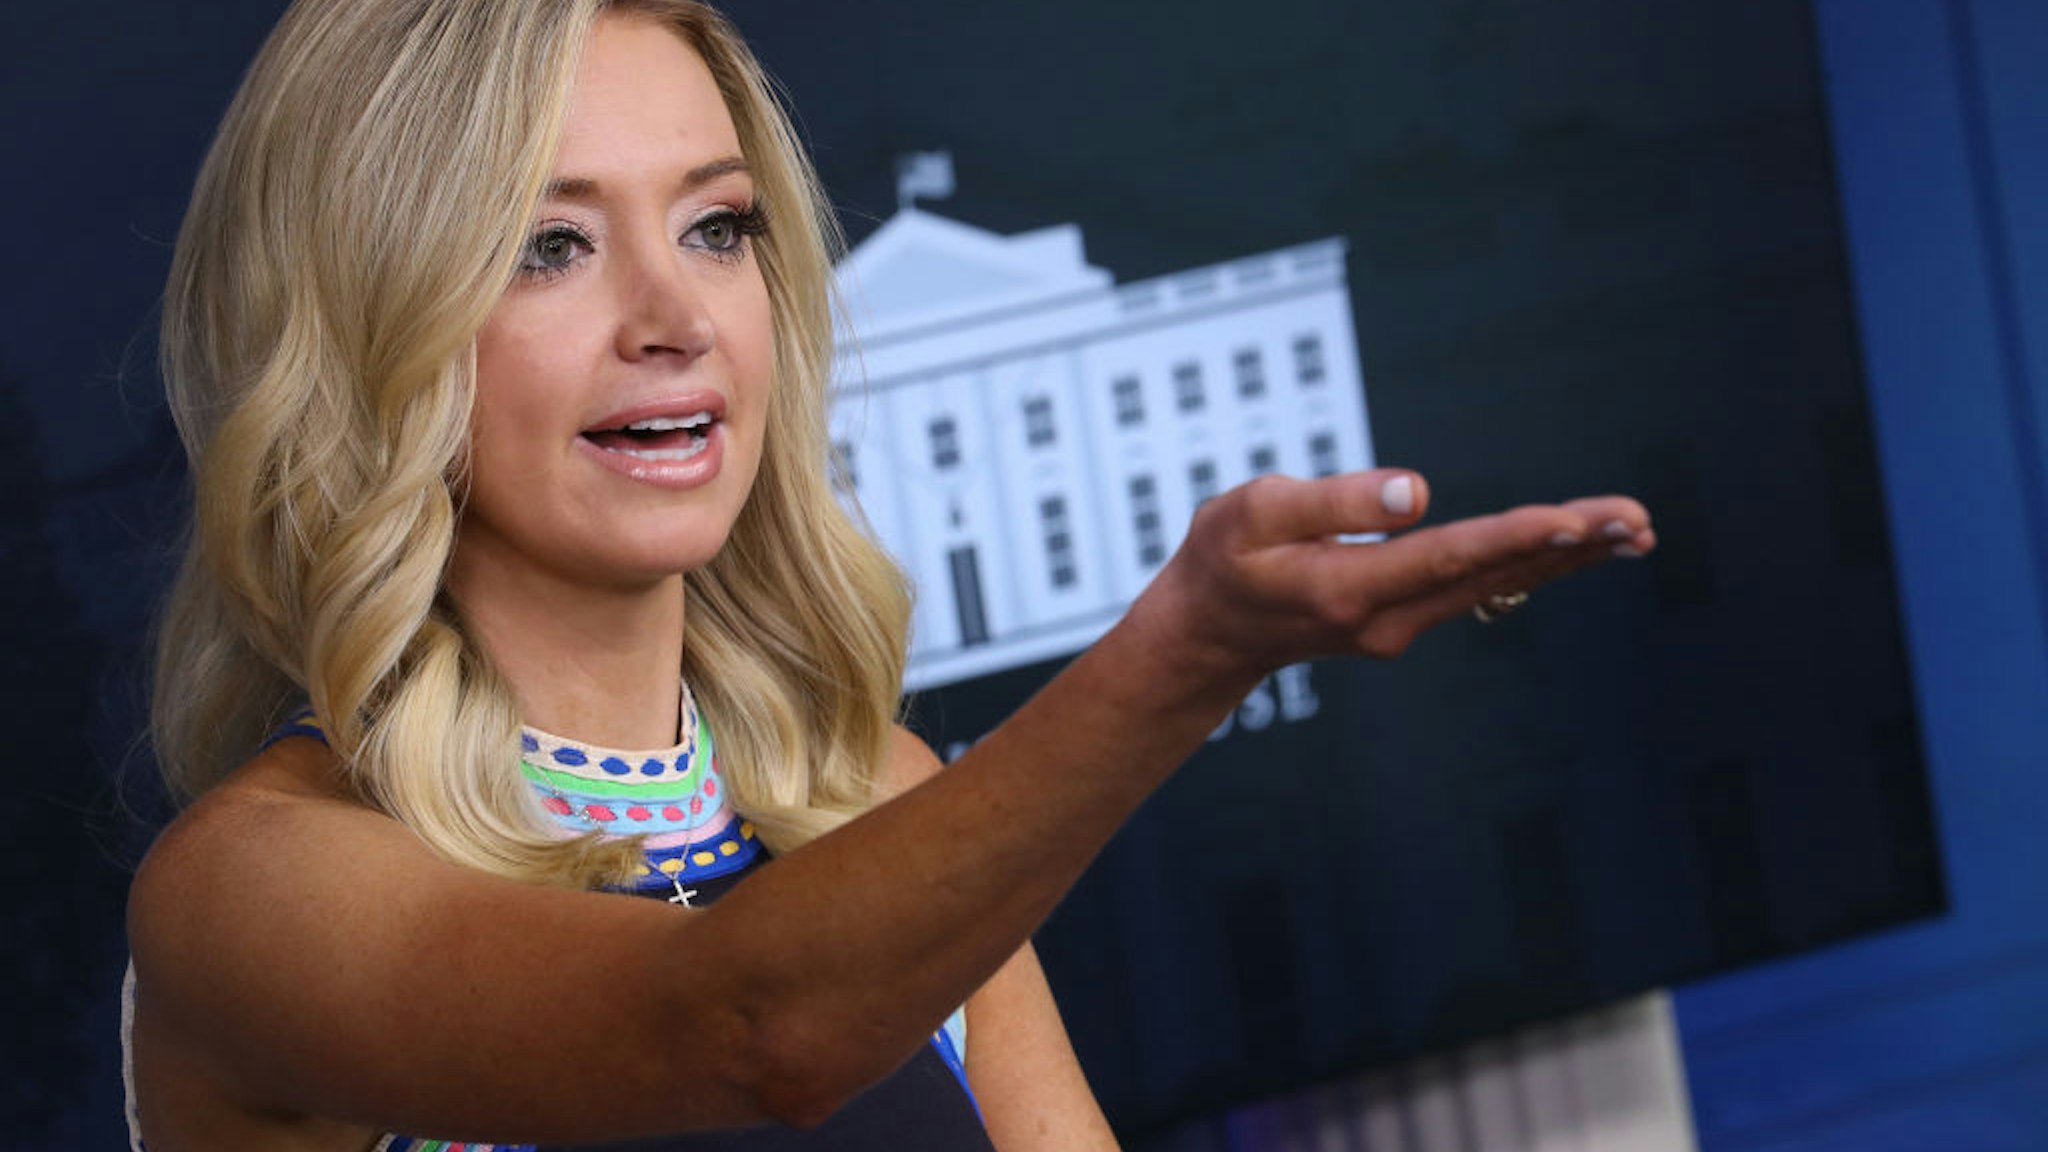 White House Press Secretary Kayleigh McEnany holds a news conference in the Brady Press Briefing Room at the White House on September 24, 2020 in Washington, DC.